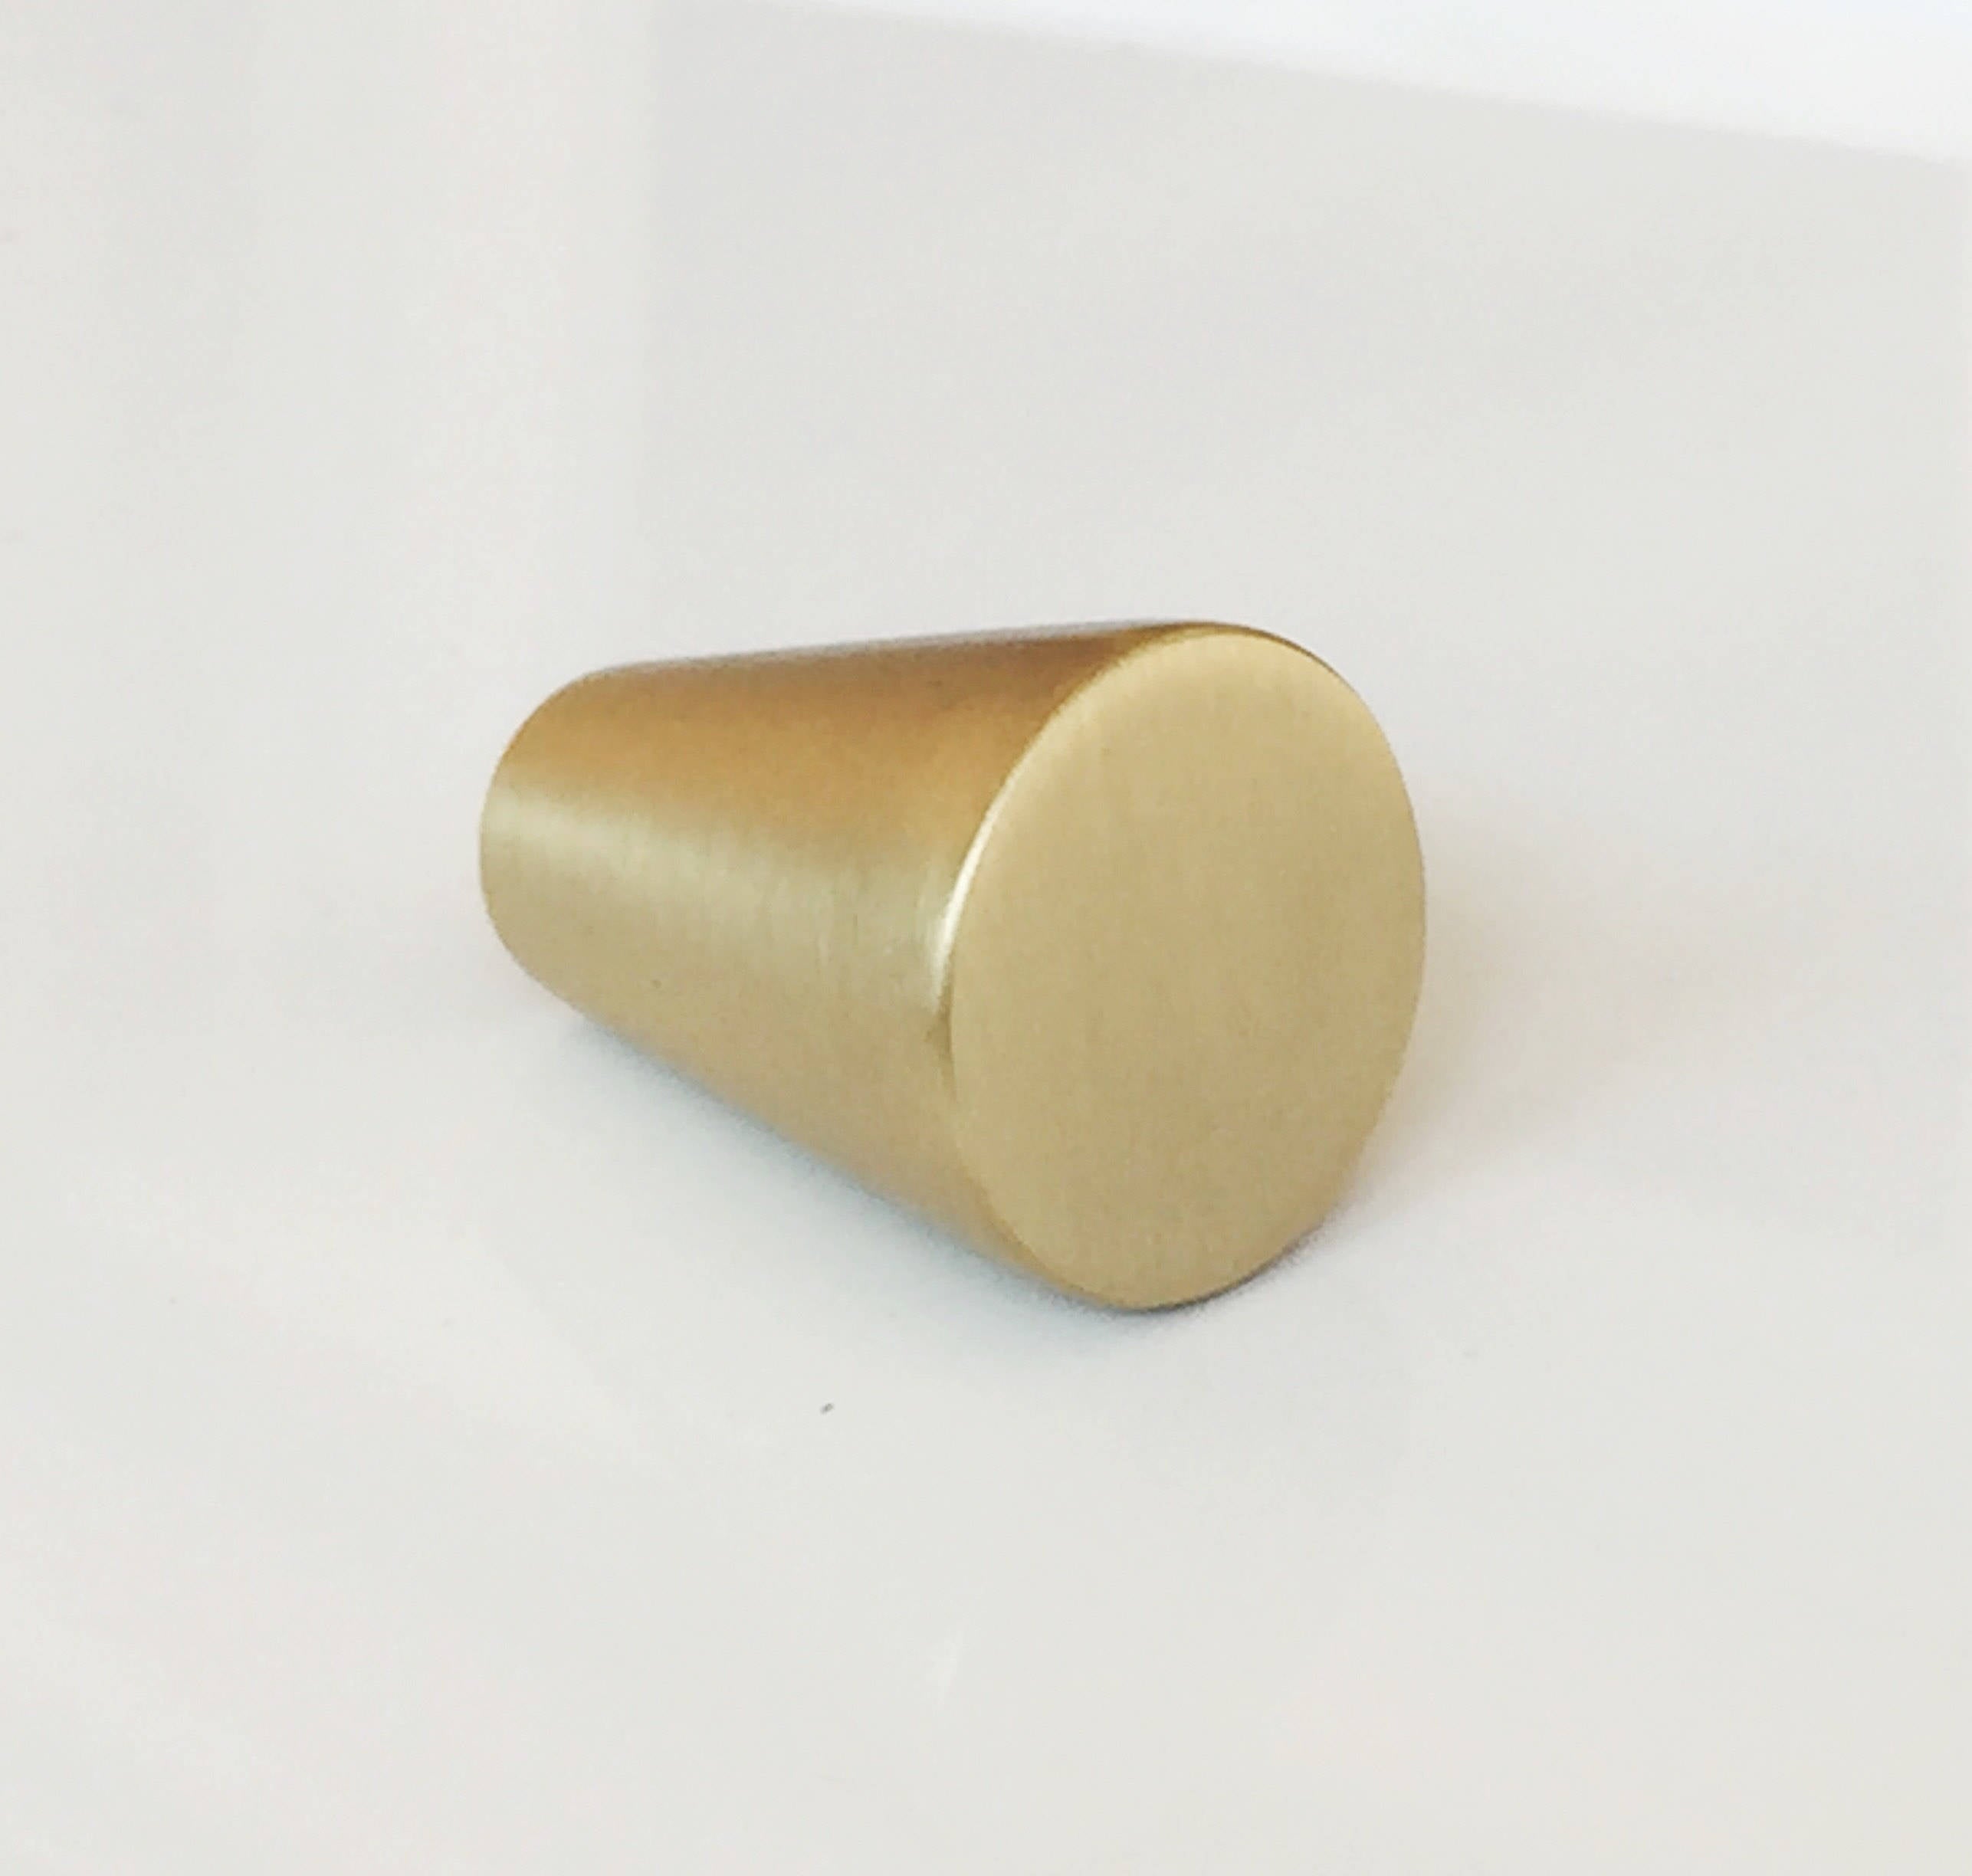 Satin Brass "Luxe" Drawer Pulls and Cabinet Knobs - Forge Hardware Studio